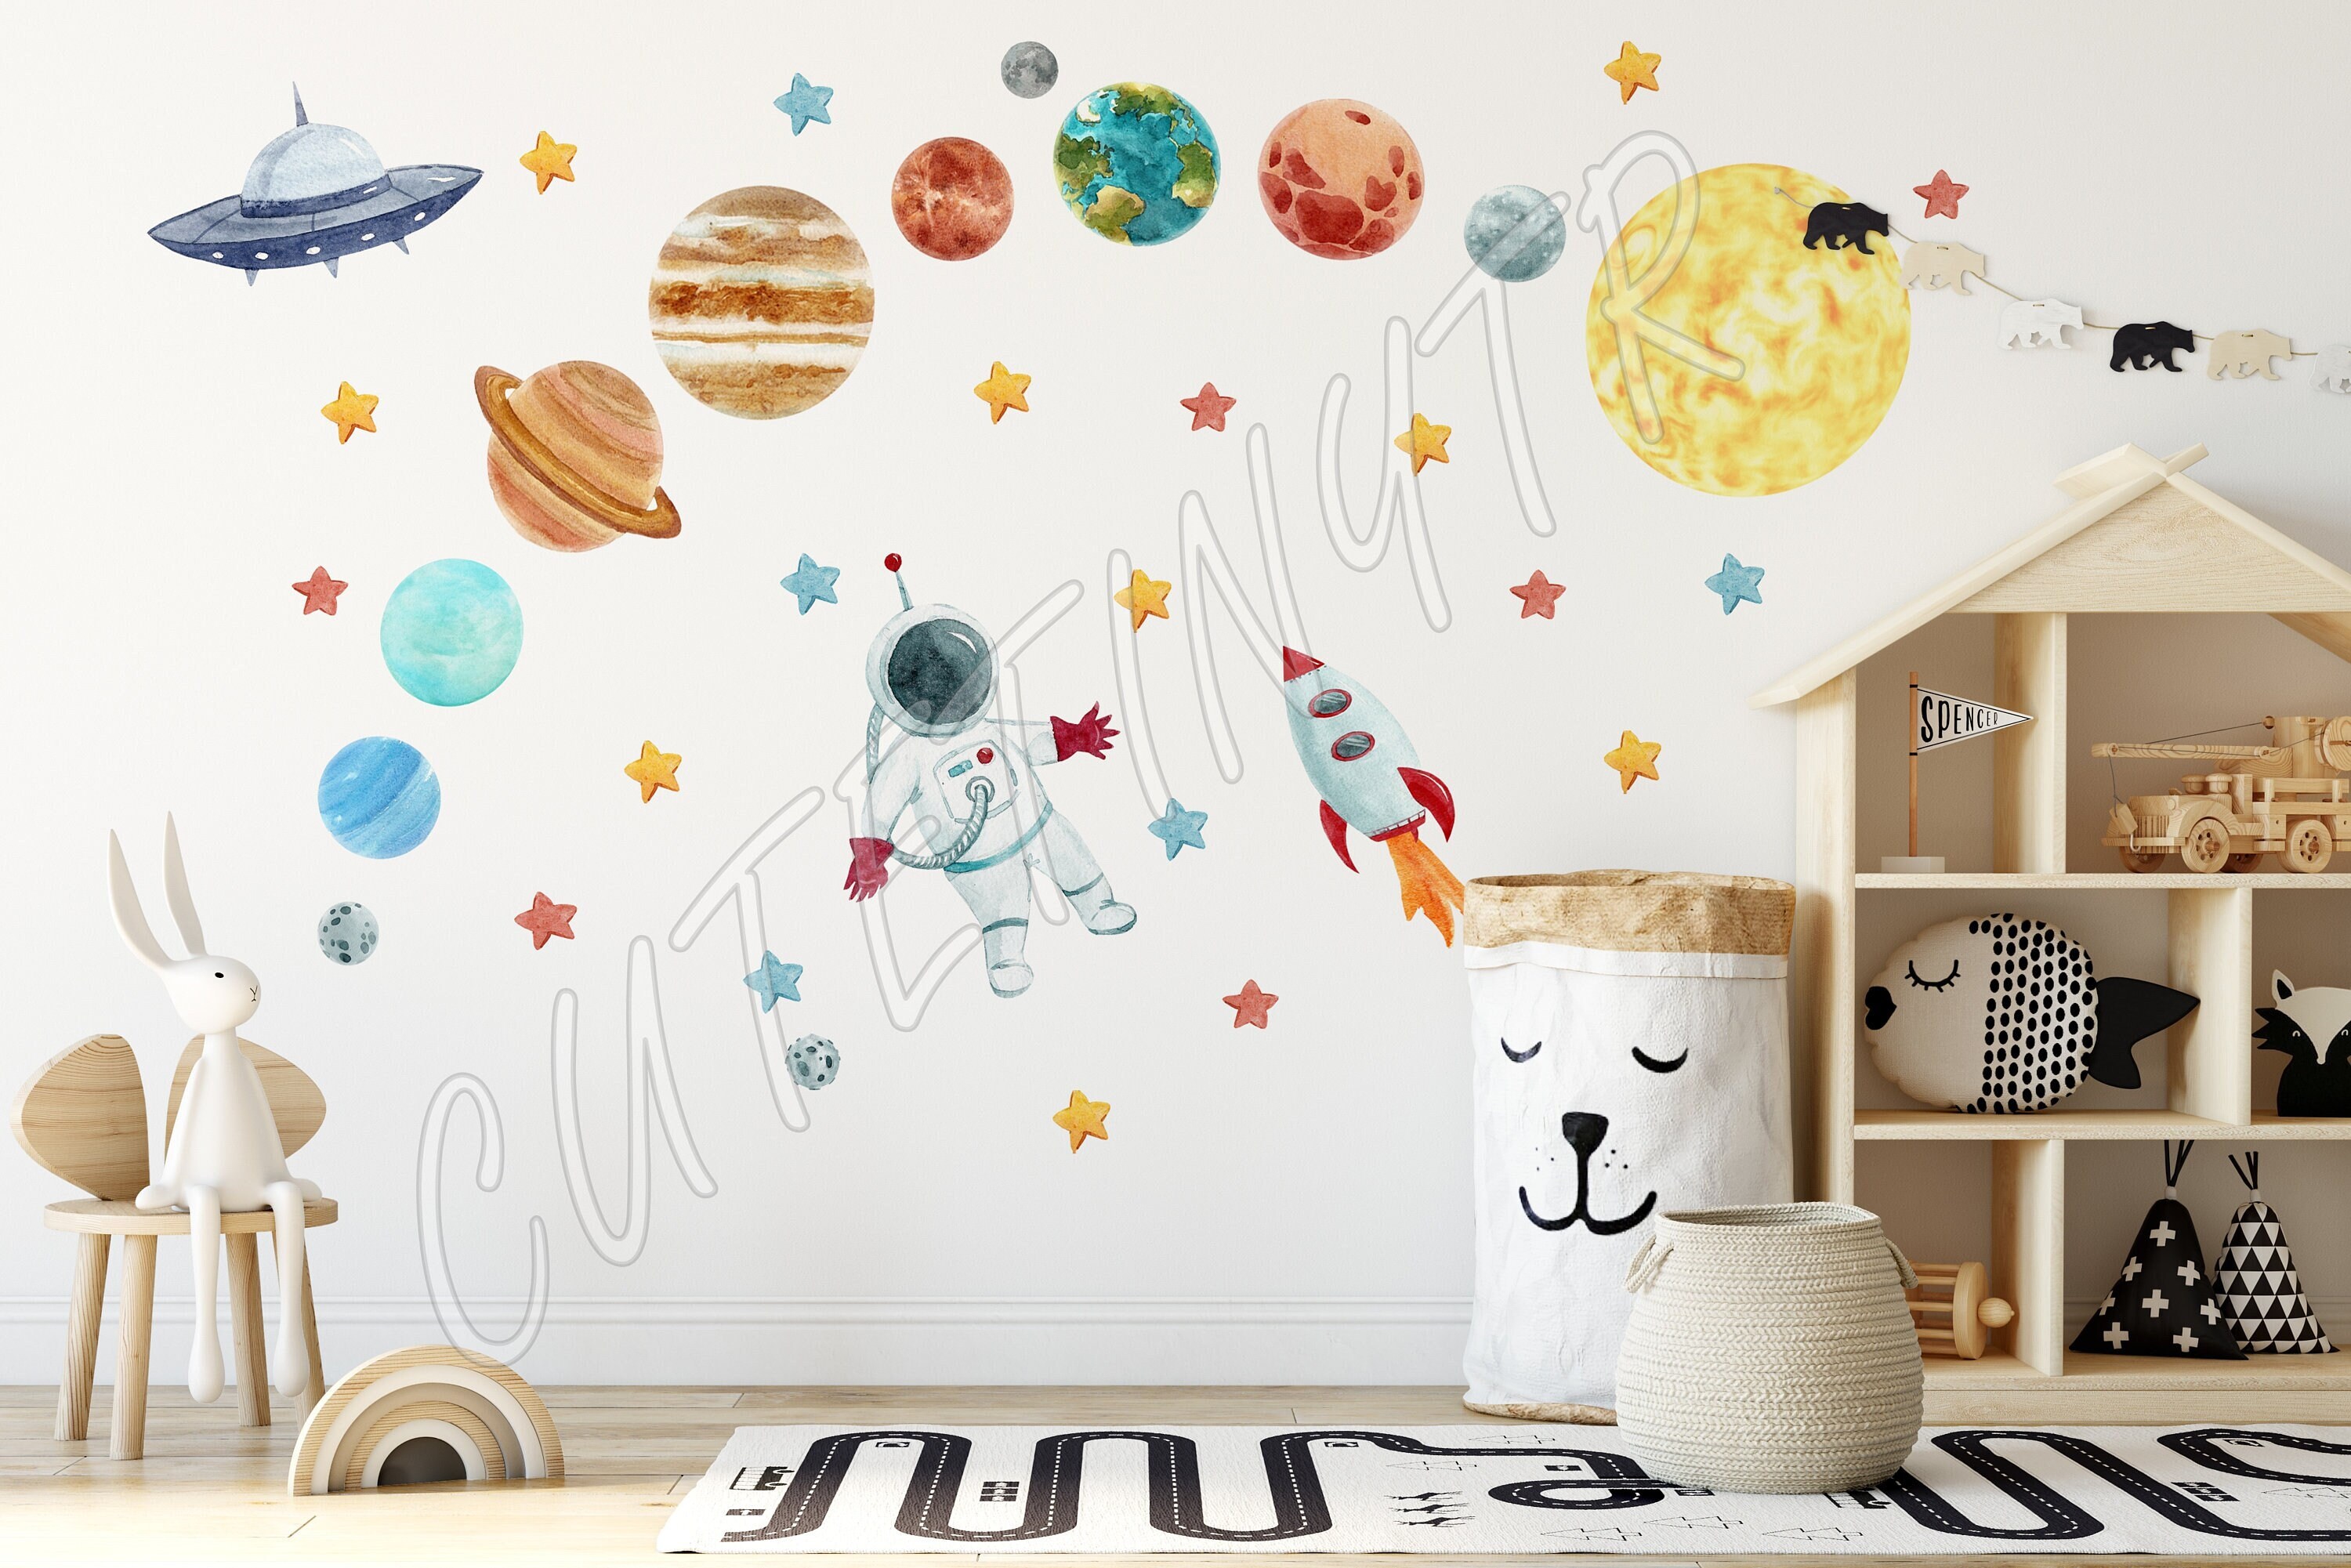 A Glow in The Dark Planet Wall Stickers E-Scenery Peel and Stick DIY 3D Wall Decals Mural Art Wallpaper for Kids Room Home Nursery Party Window Decor 